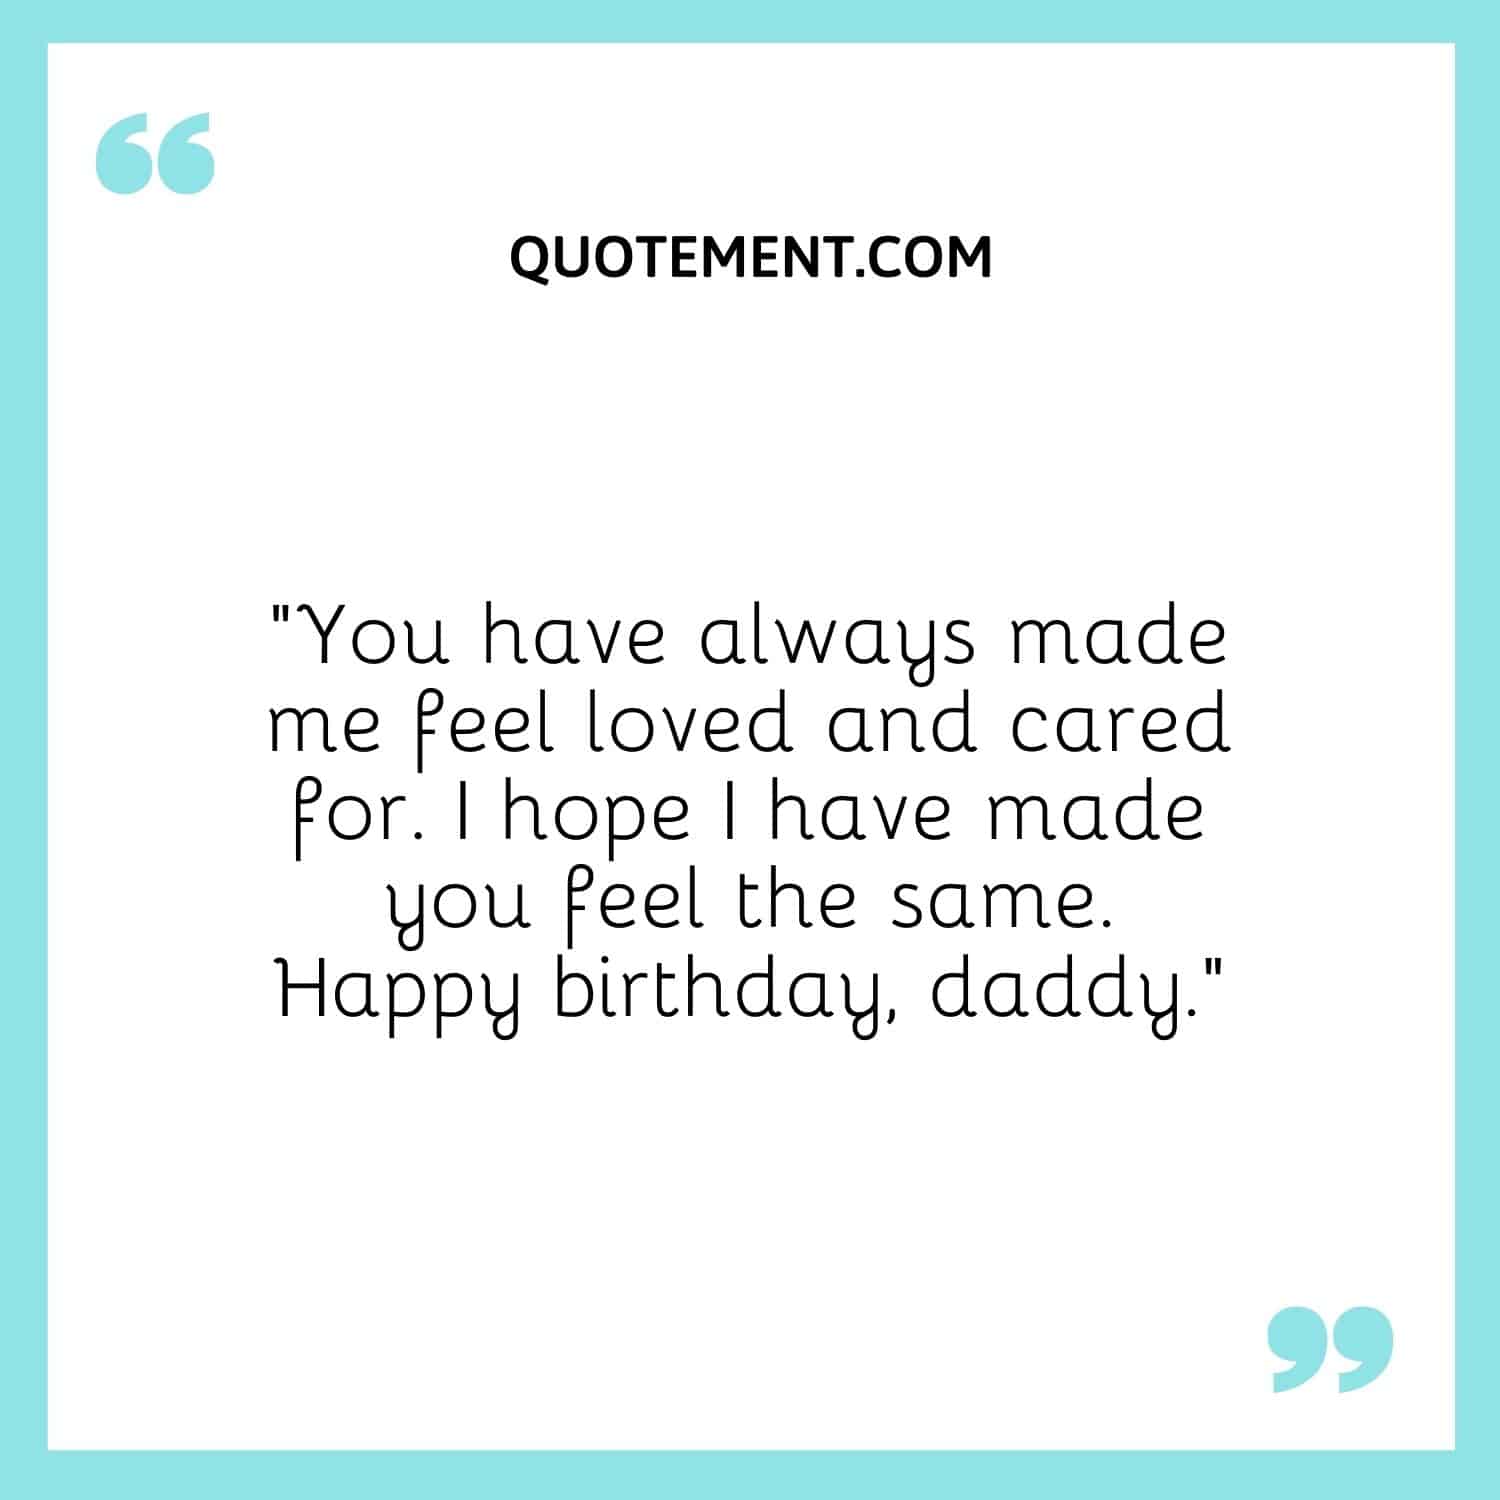 You have always made me feel loved and cared for.